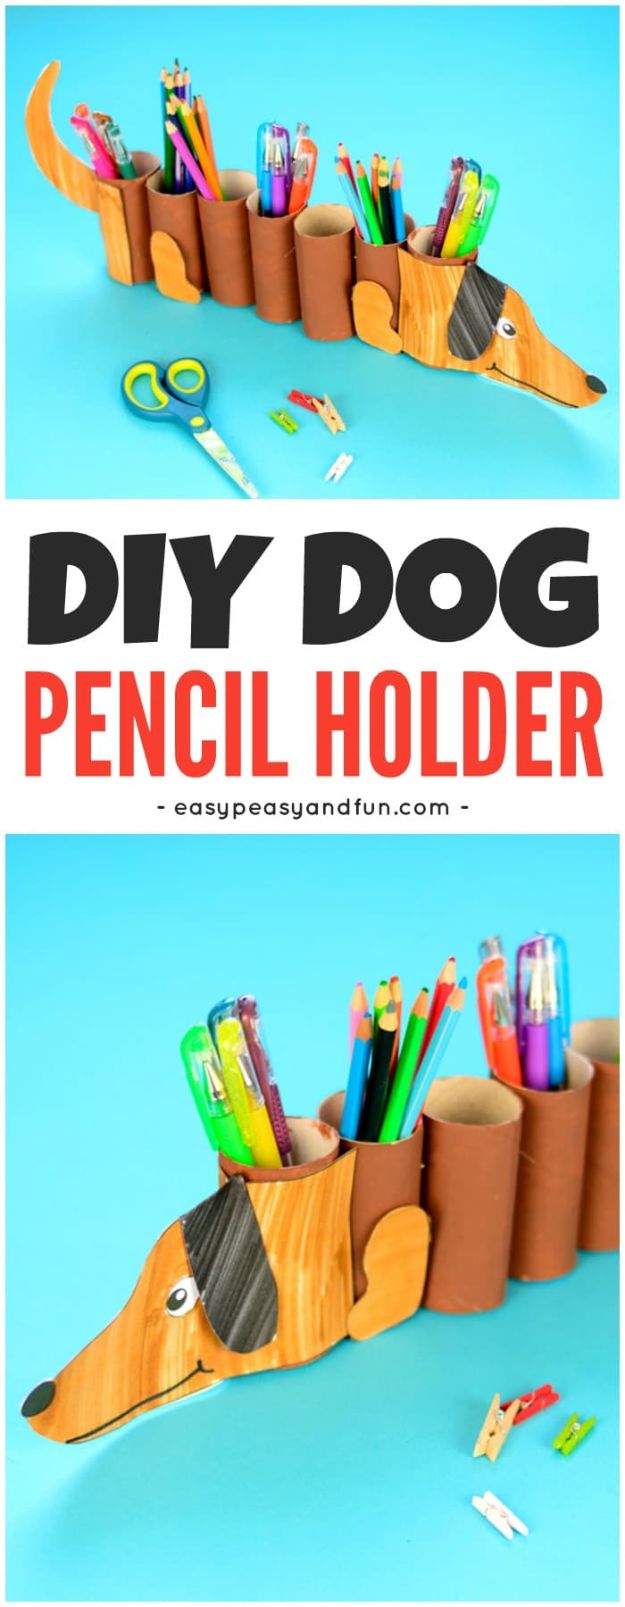 DIY Ideas With Dogs - Dog Paper Roll Pencil Holder - Cute and Easy DIY Projects for Dog Lovers - Wall and Home Decor Projects, Things To Make and Sell on Etsy - Quick Gifts to Make for Friends Who Have Puppies and Doggies - Homemade No Sew Projects- Fun Jewelry, Cool Clothes and Accessories #dogs #crafts #diyideas